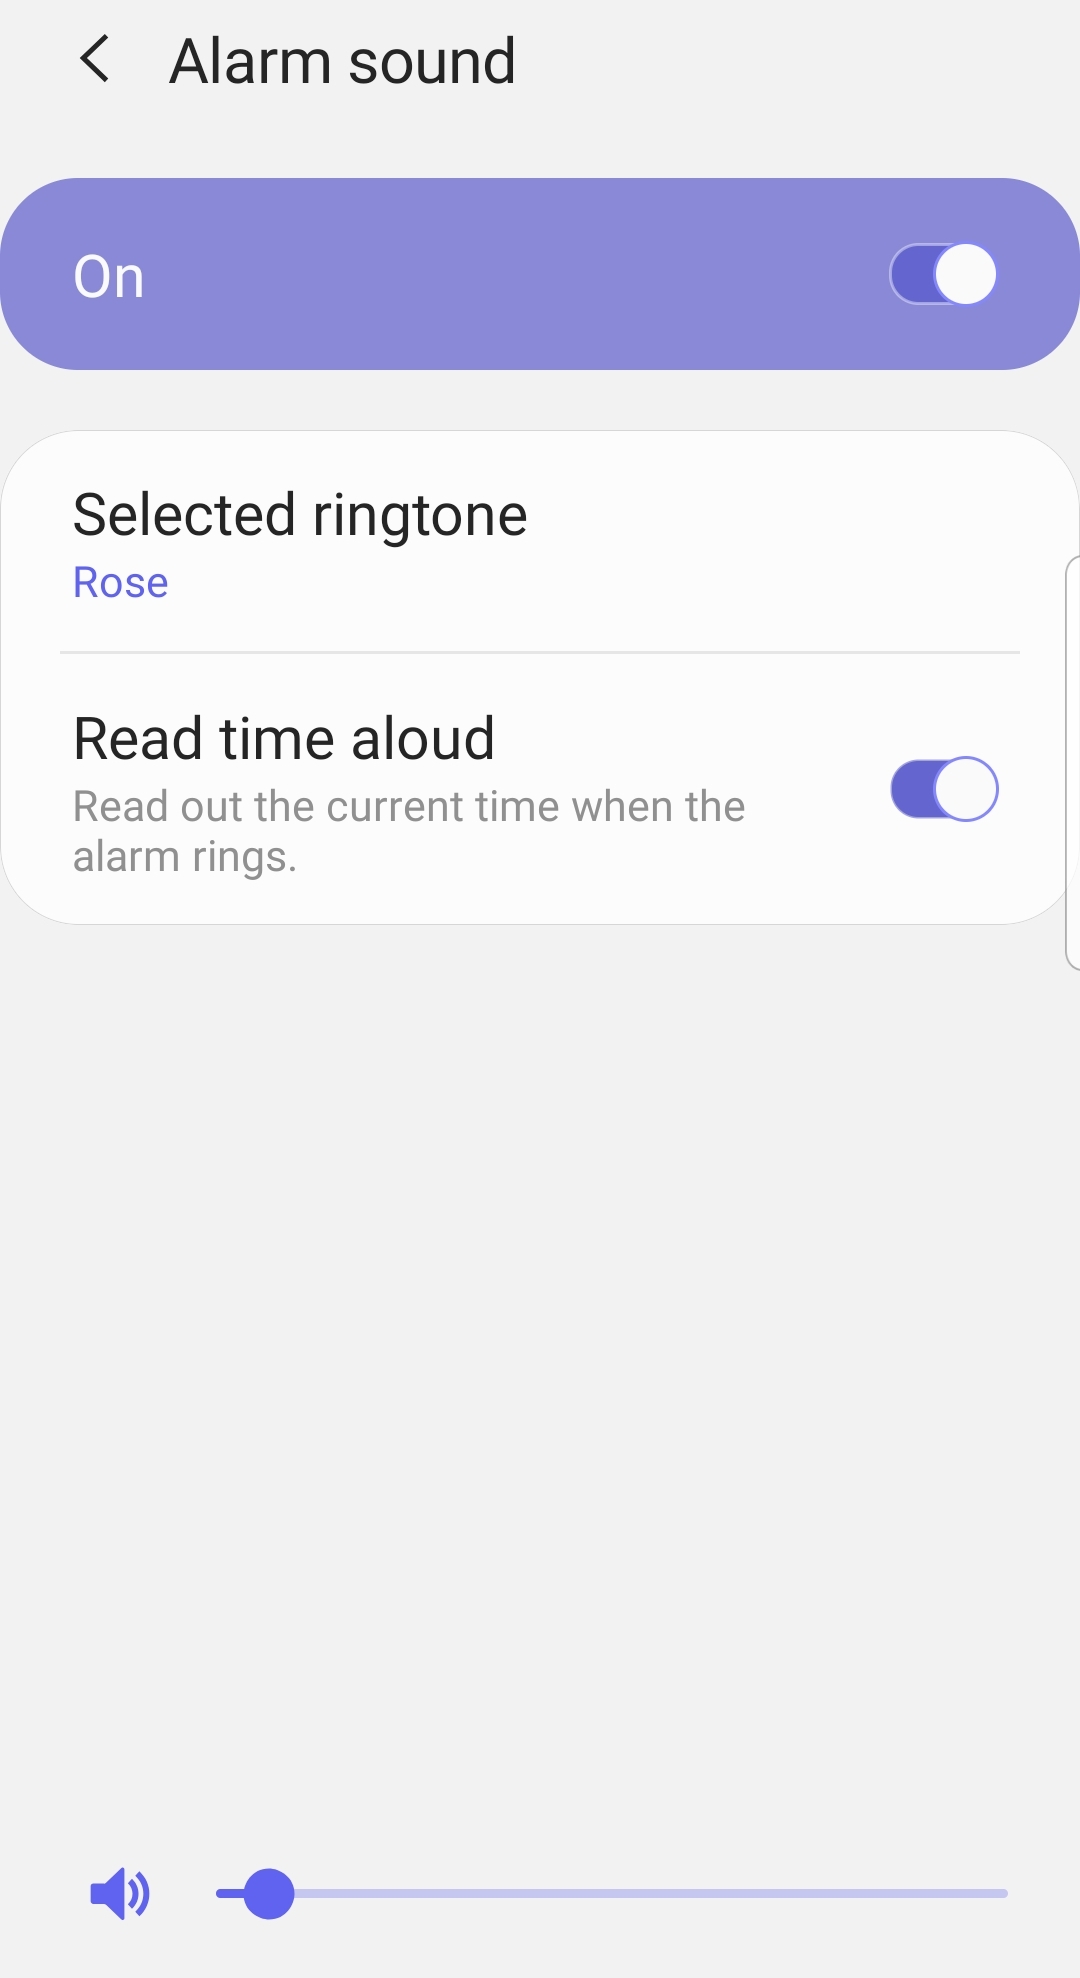 Galaxy S8 and Android Pie (9.0), One UI Alarm sound - Samsung Community